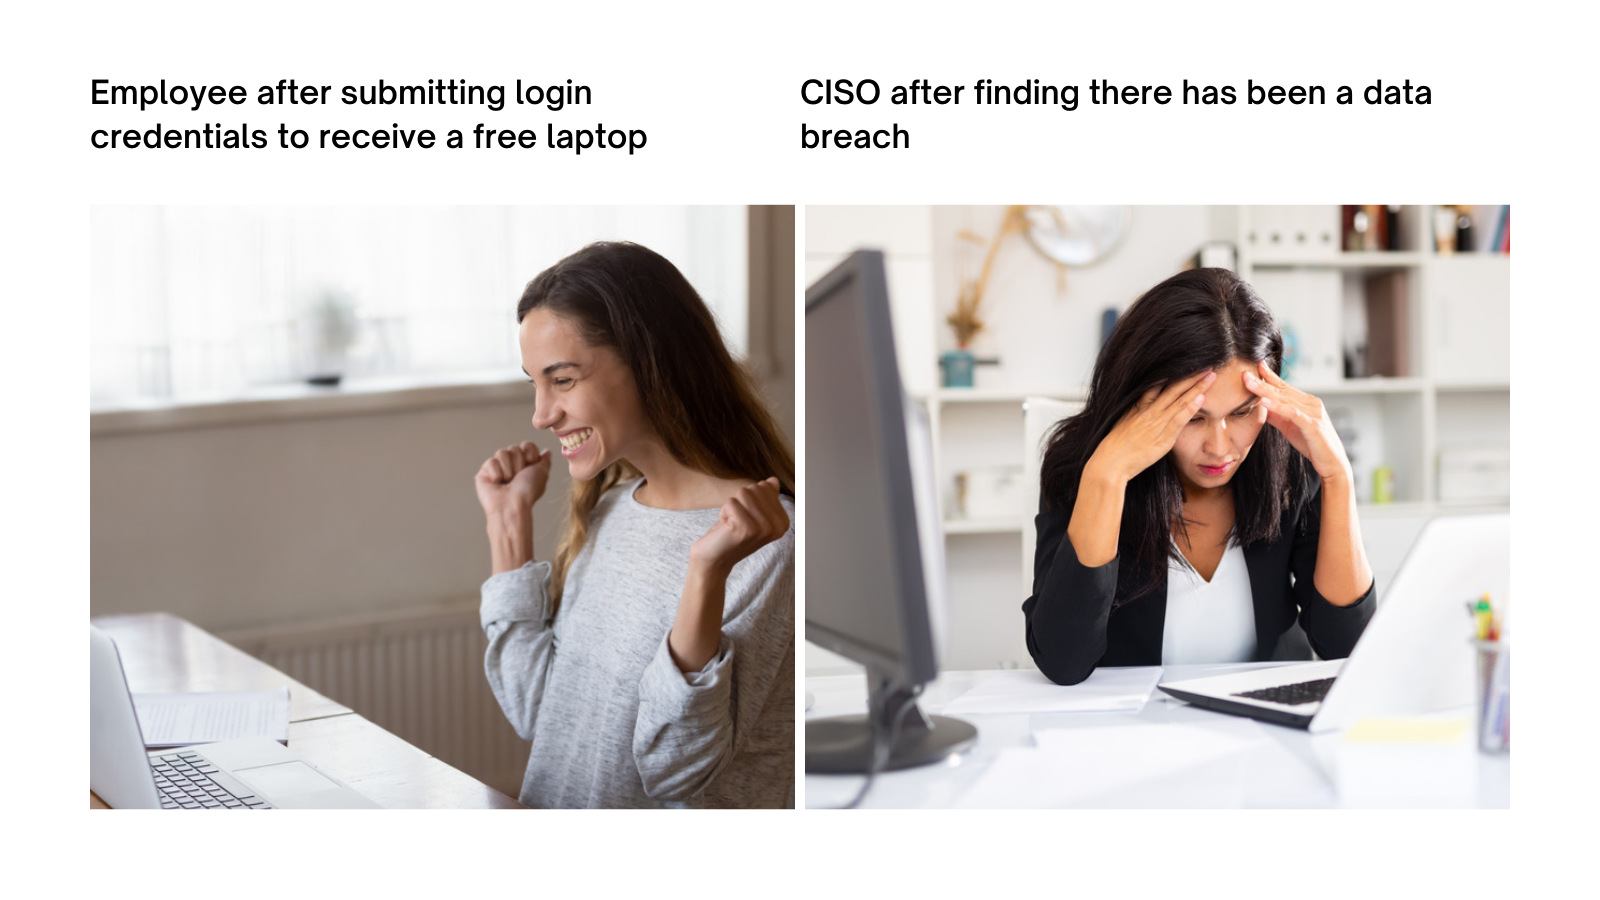 Cyber security memes